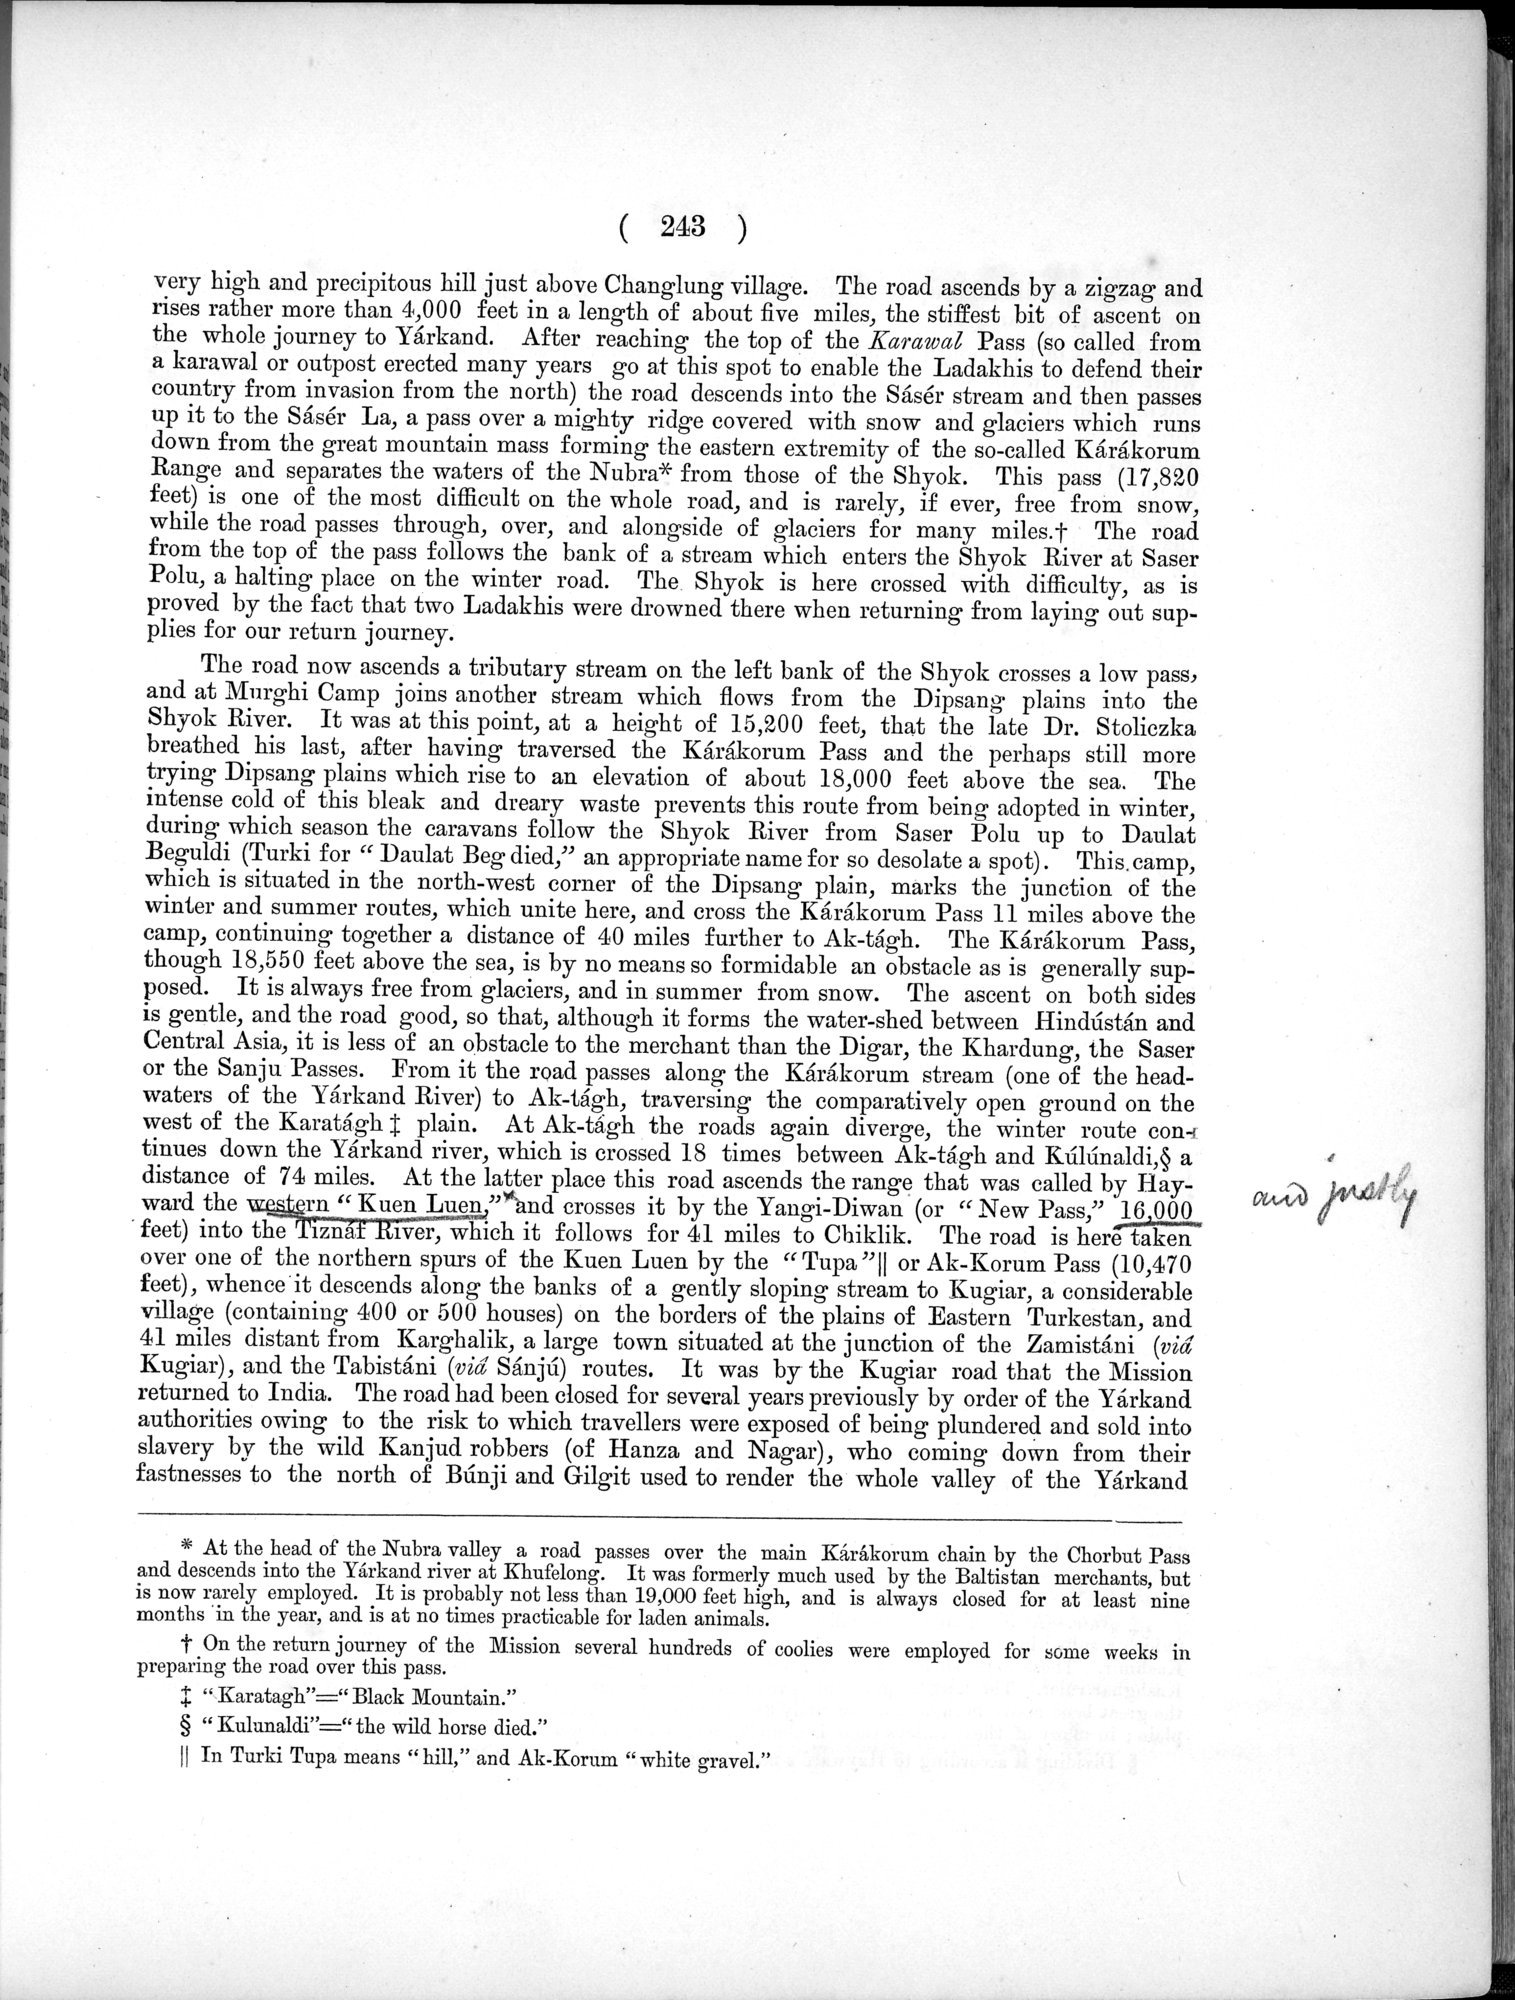 Report of a Mission to Yarkund in 1873 : vol.1 / Page 349 (Grayscale High Resolution Image)